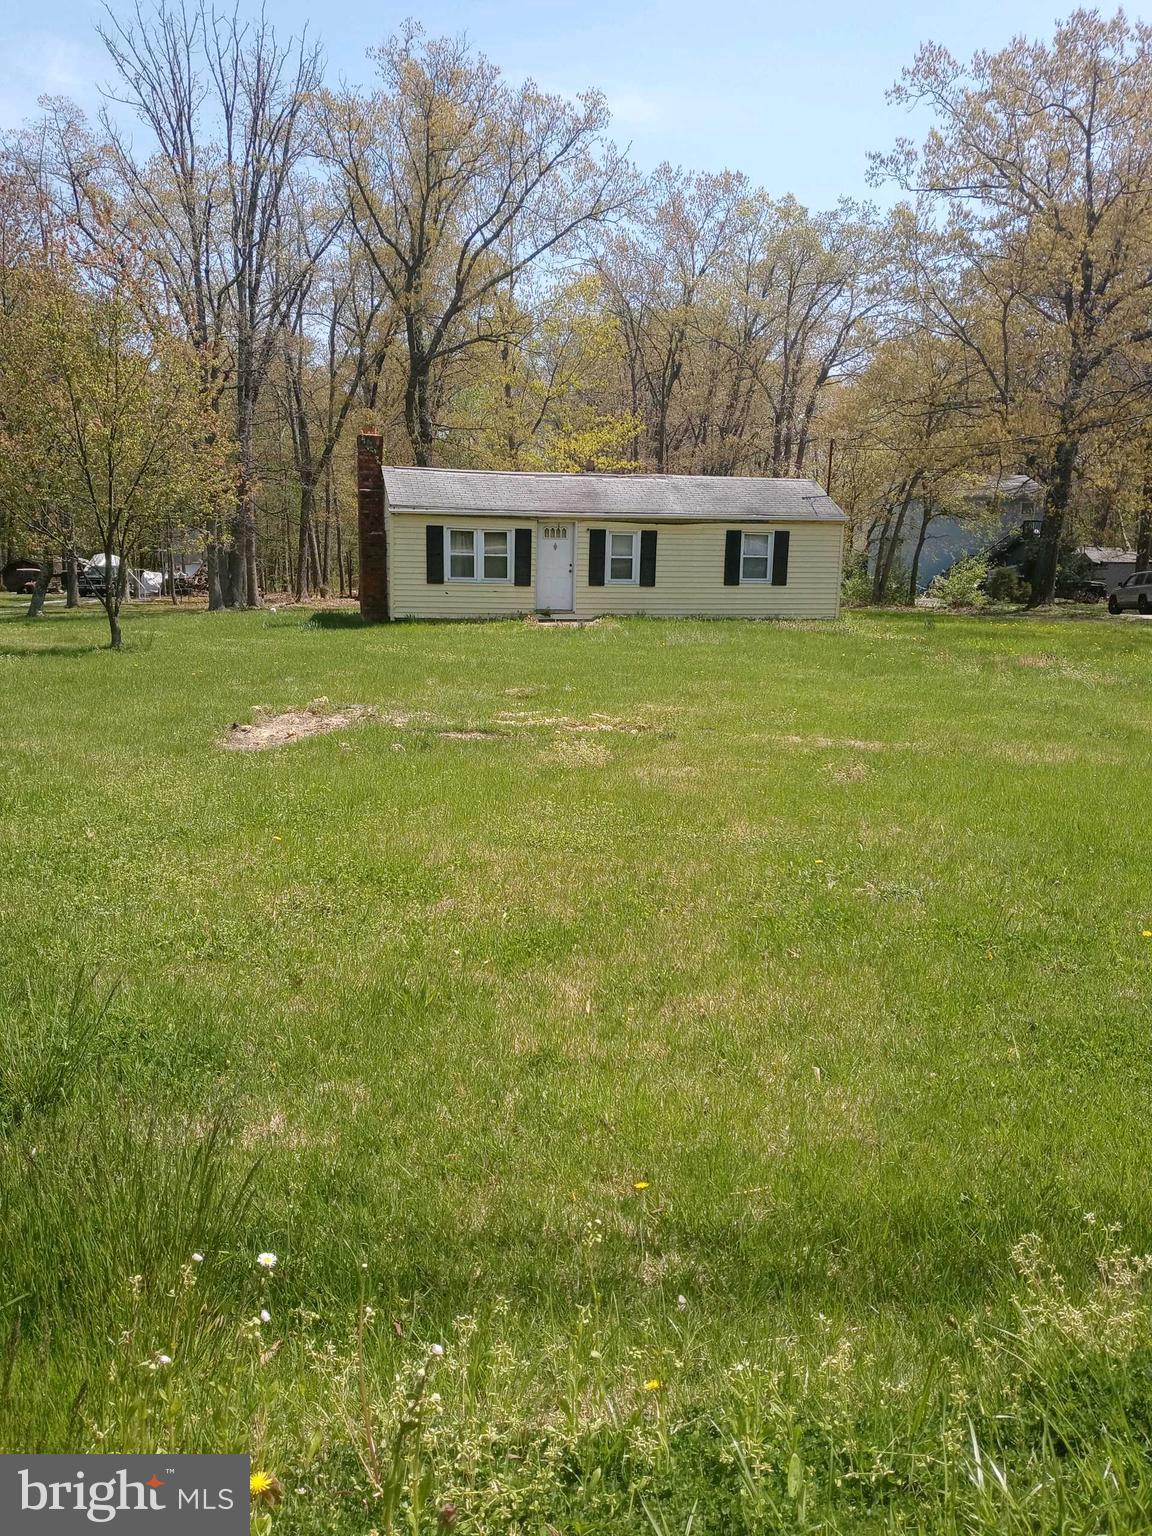 a view of house with yard in front of house